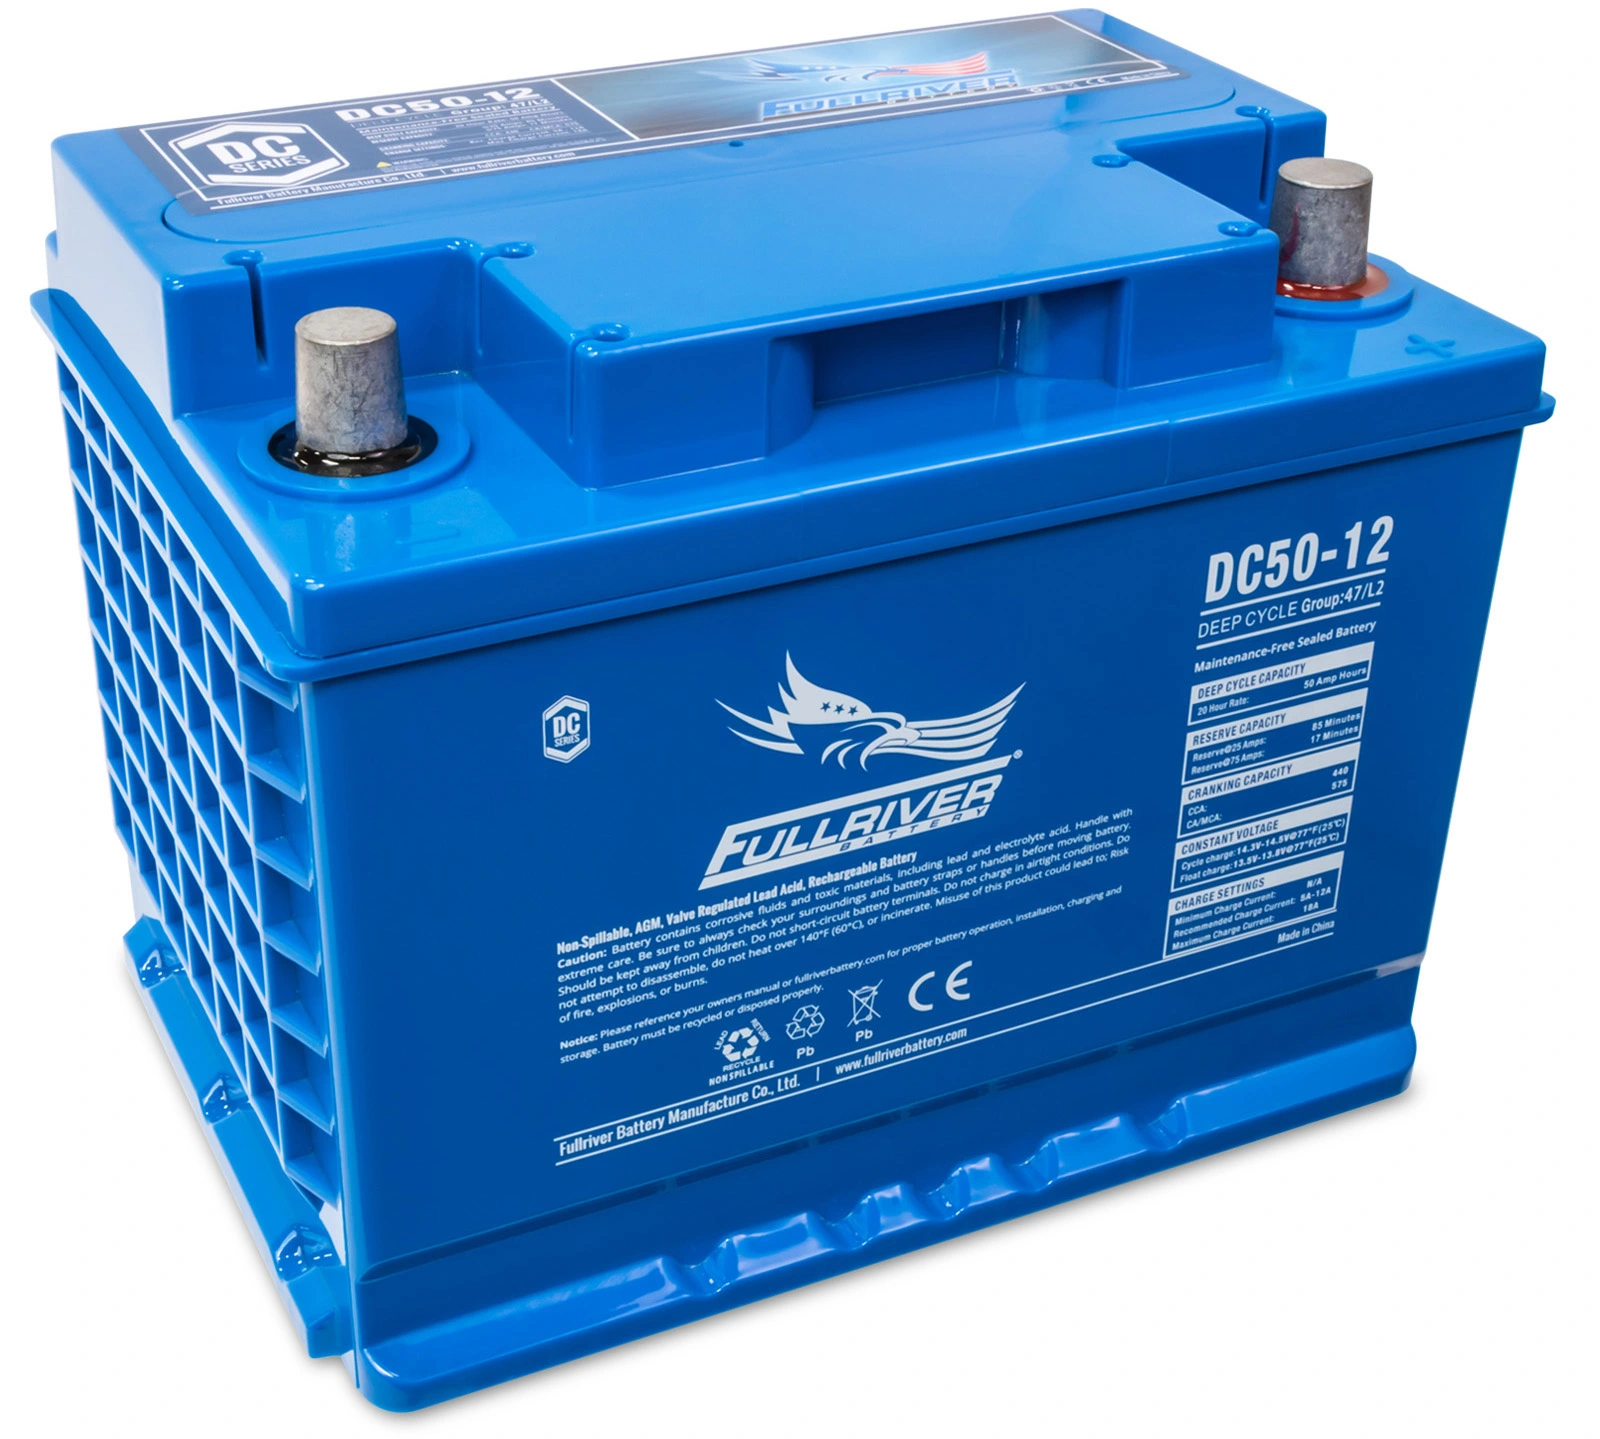 DC Series DC50-12 AGM battery from Fullriver Battery